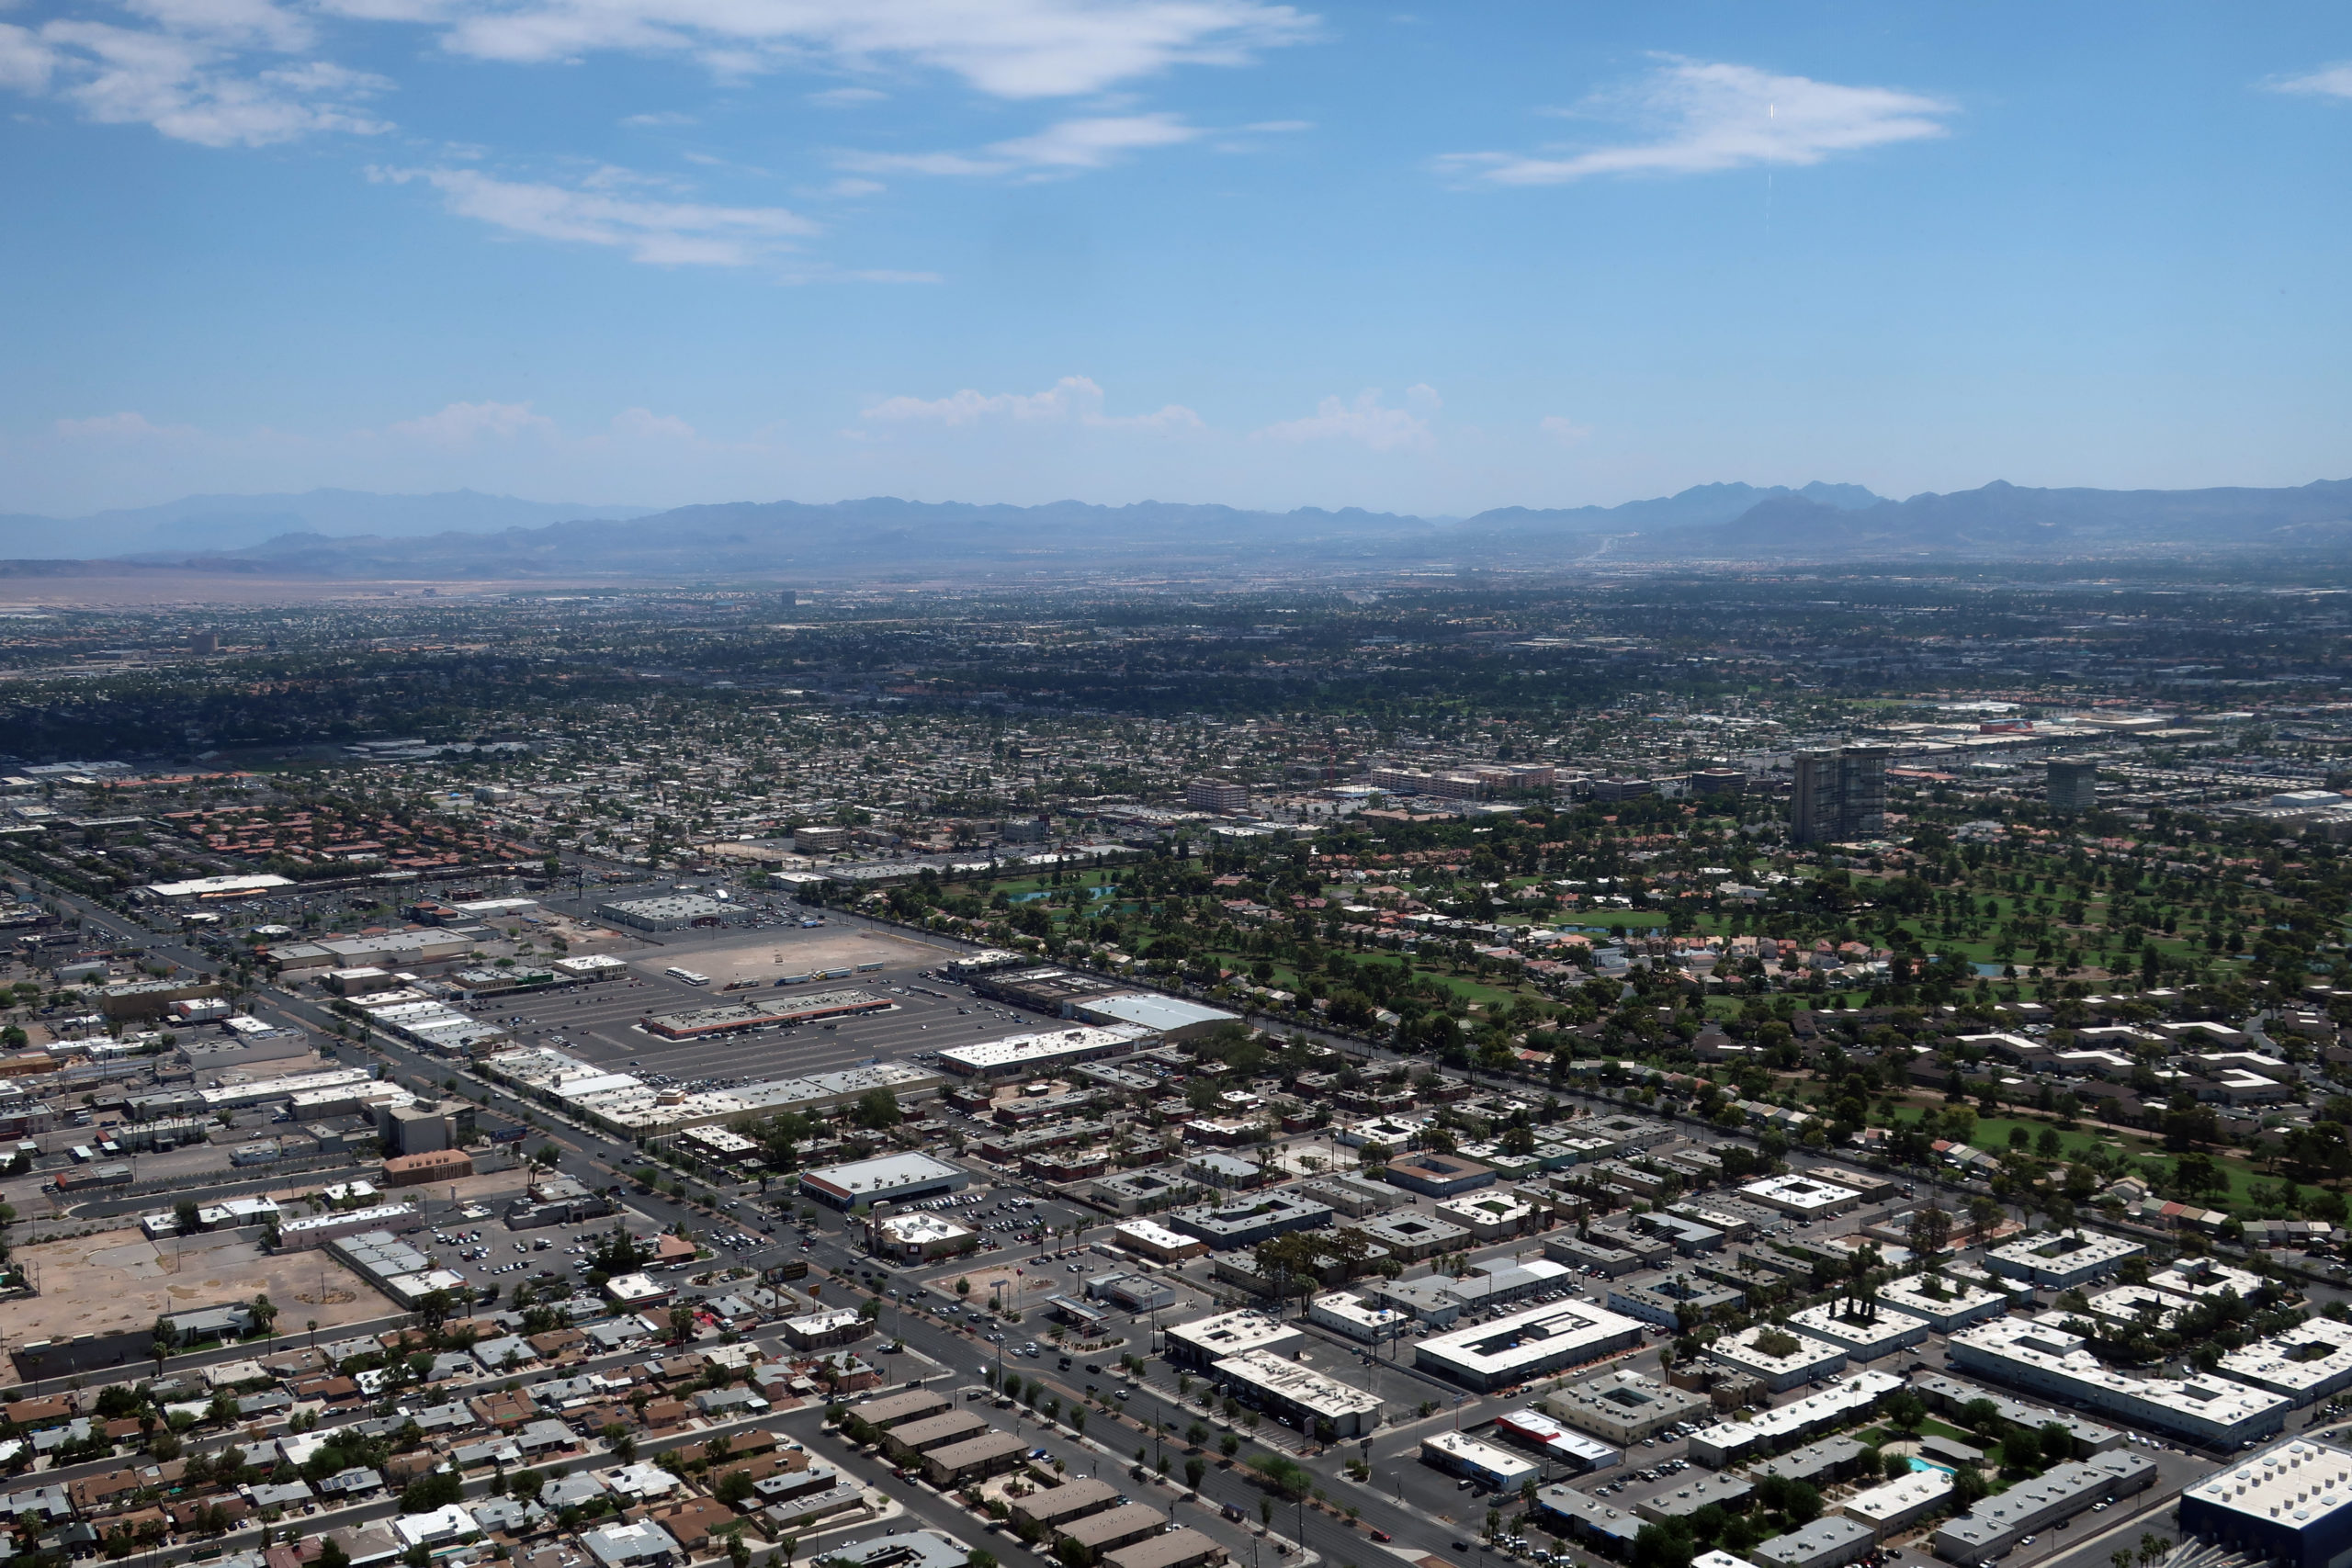 High level view of Las Vegas NV industrial area